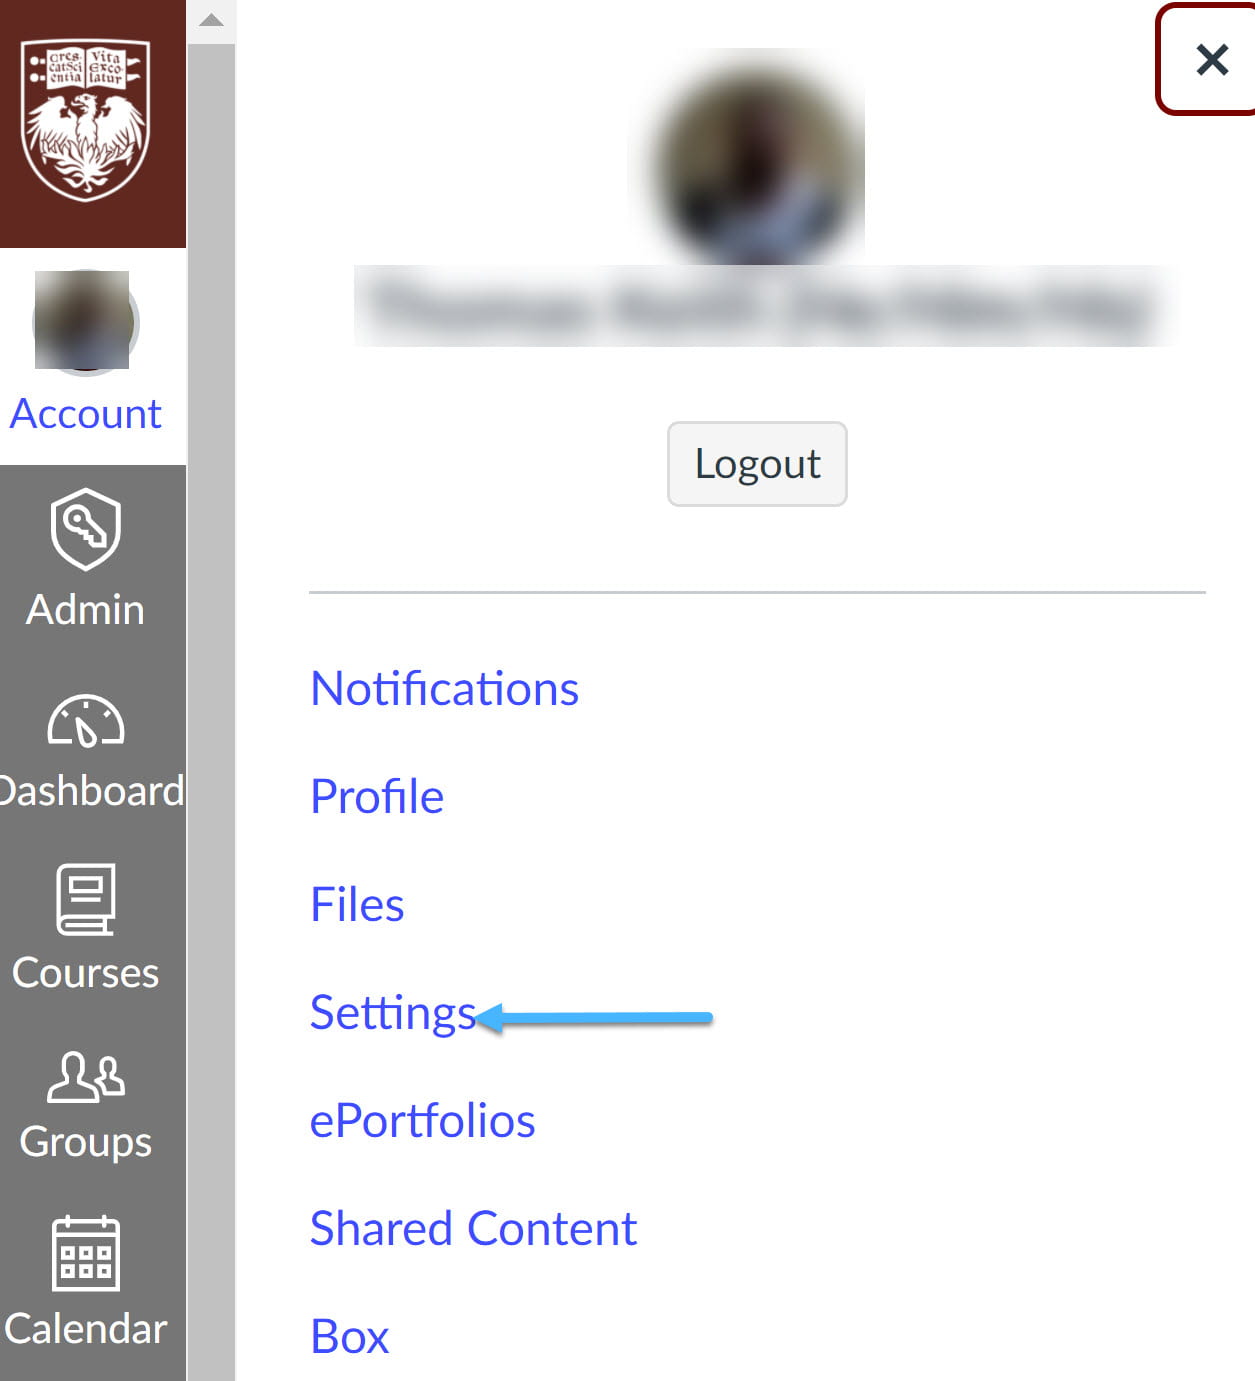 Account Menu with Settings Indicated